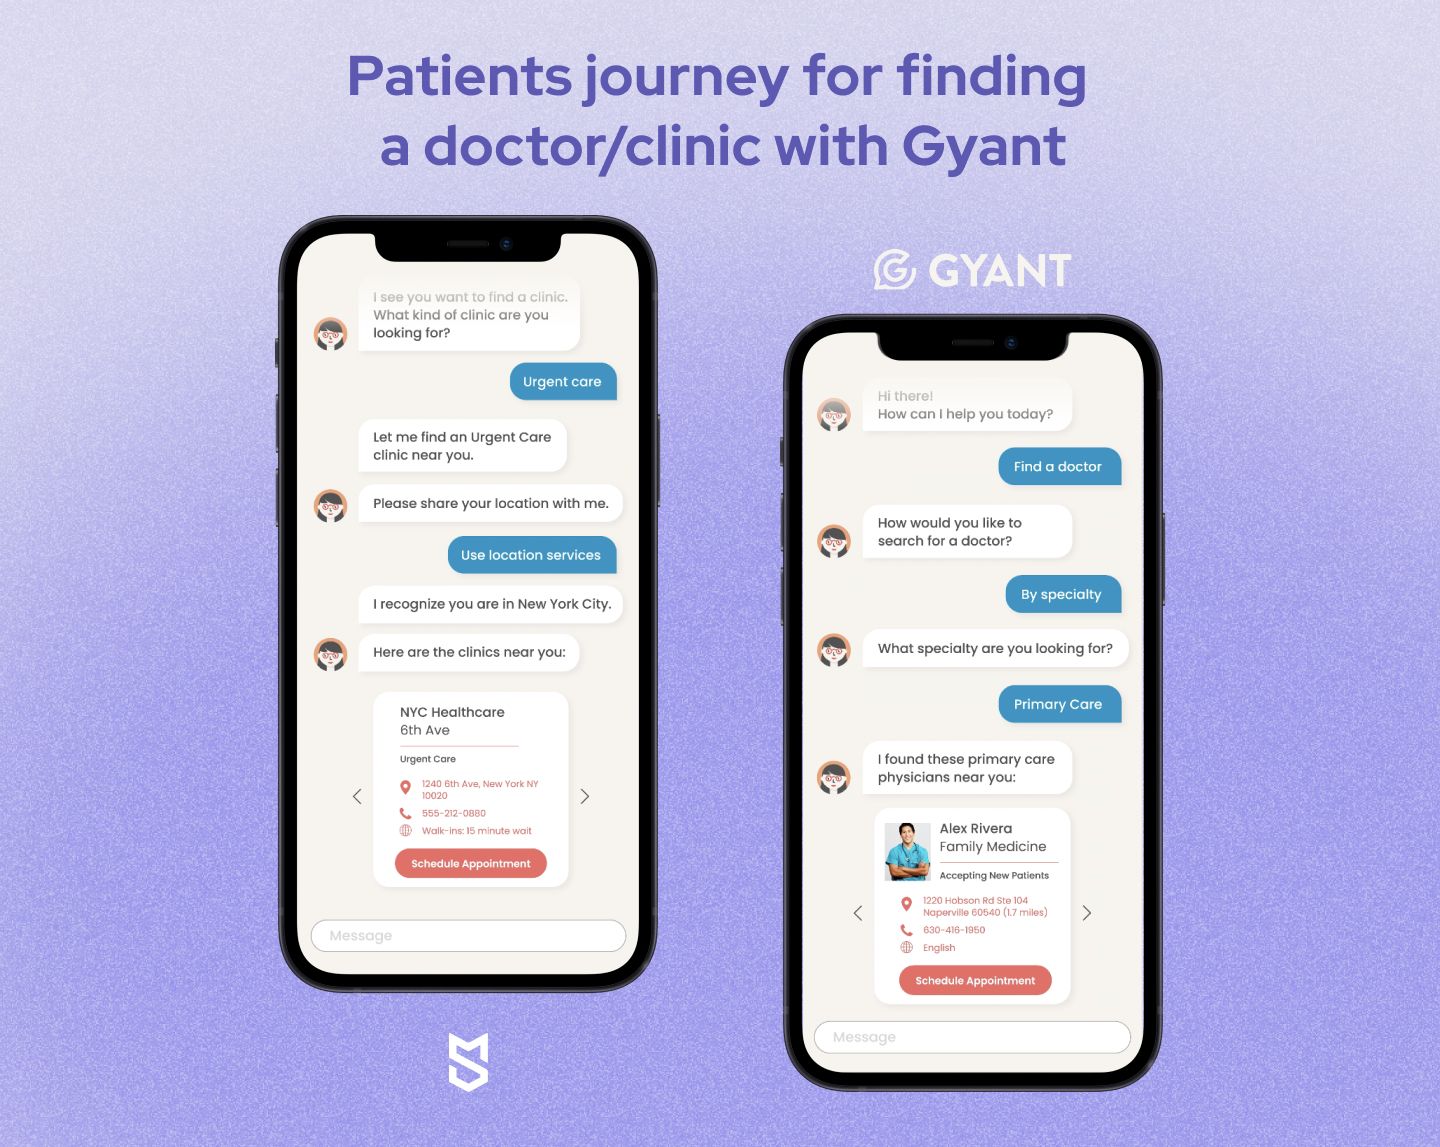 Patients journey for finding a doctor/clinic with Gyant